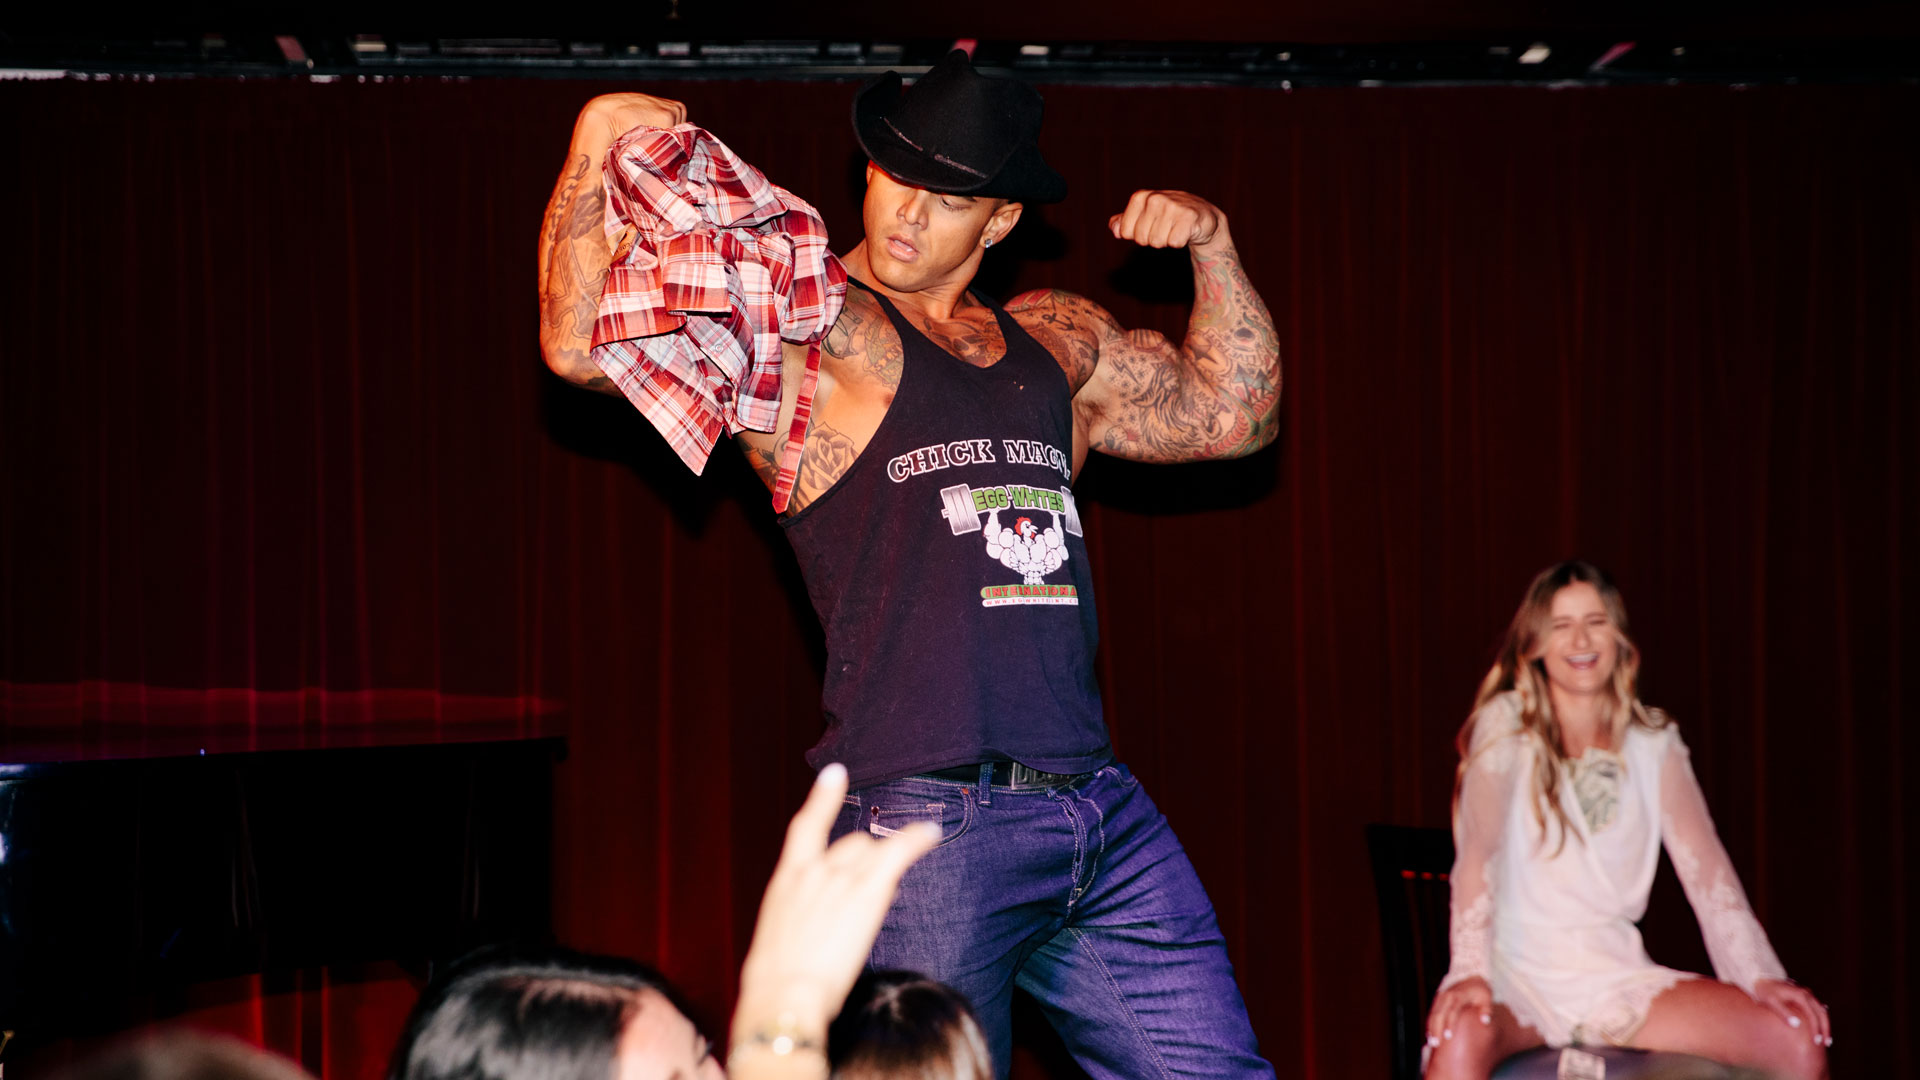 The Stripping Scion of Chippendales Kendrick Brinson